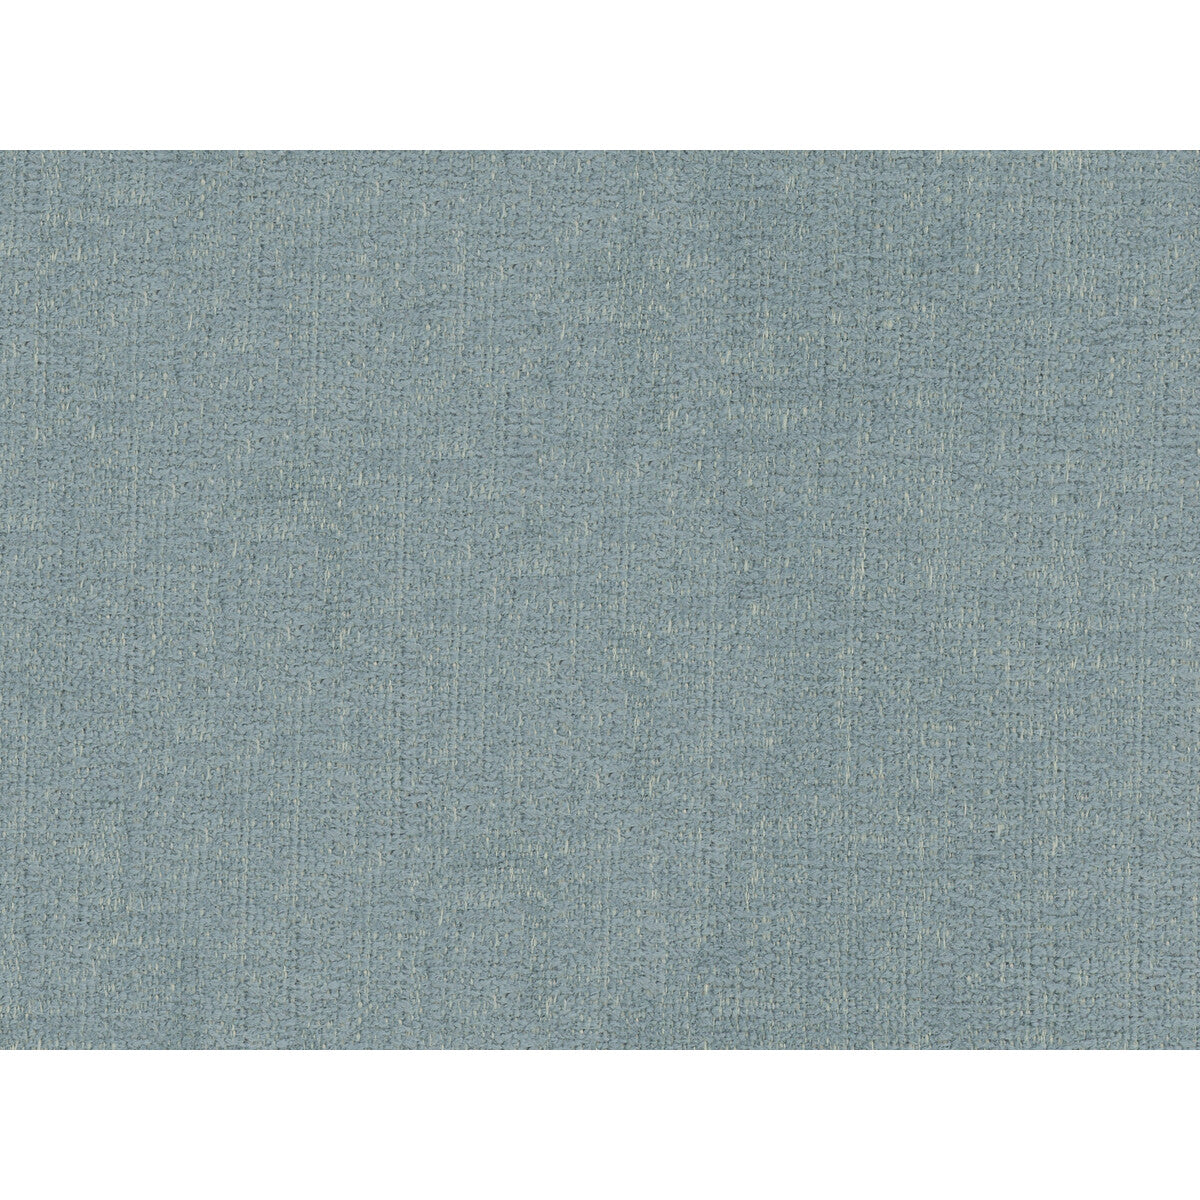 Kravet Contract fabric in 34636-15 color - pattern 34636.15.0 - by Kravet Contract in the Crypton Incase collection